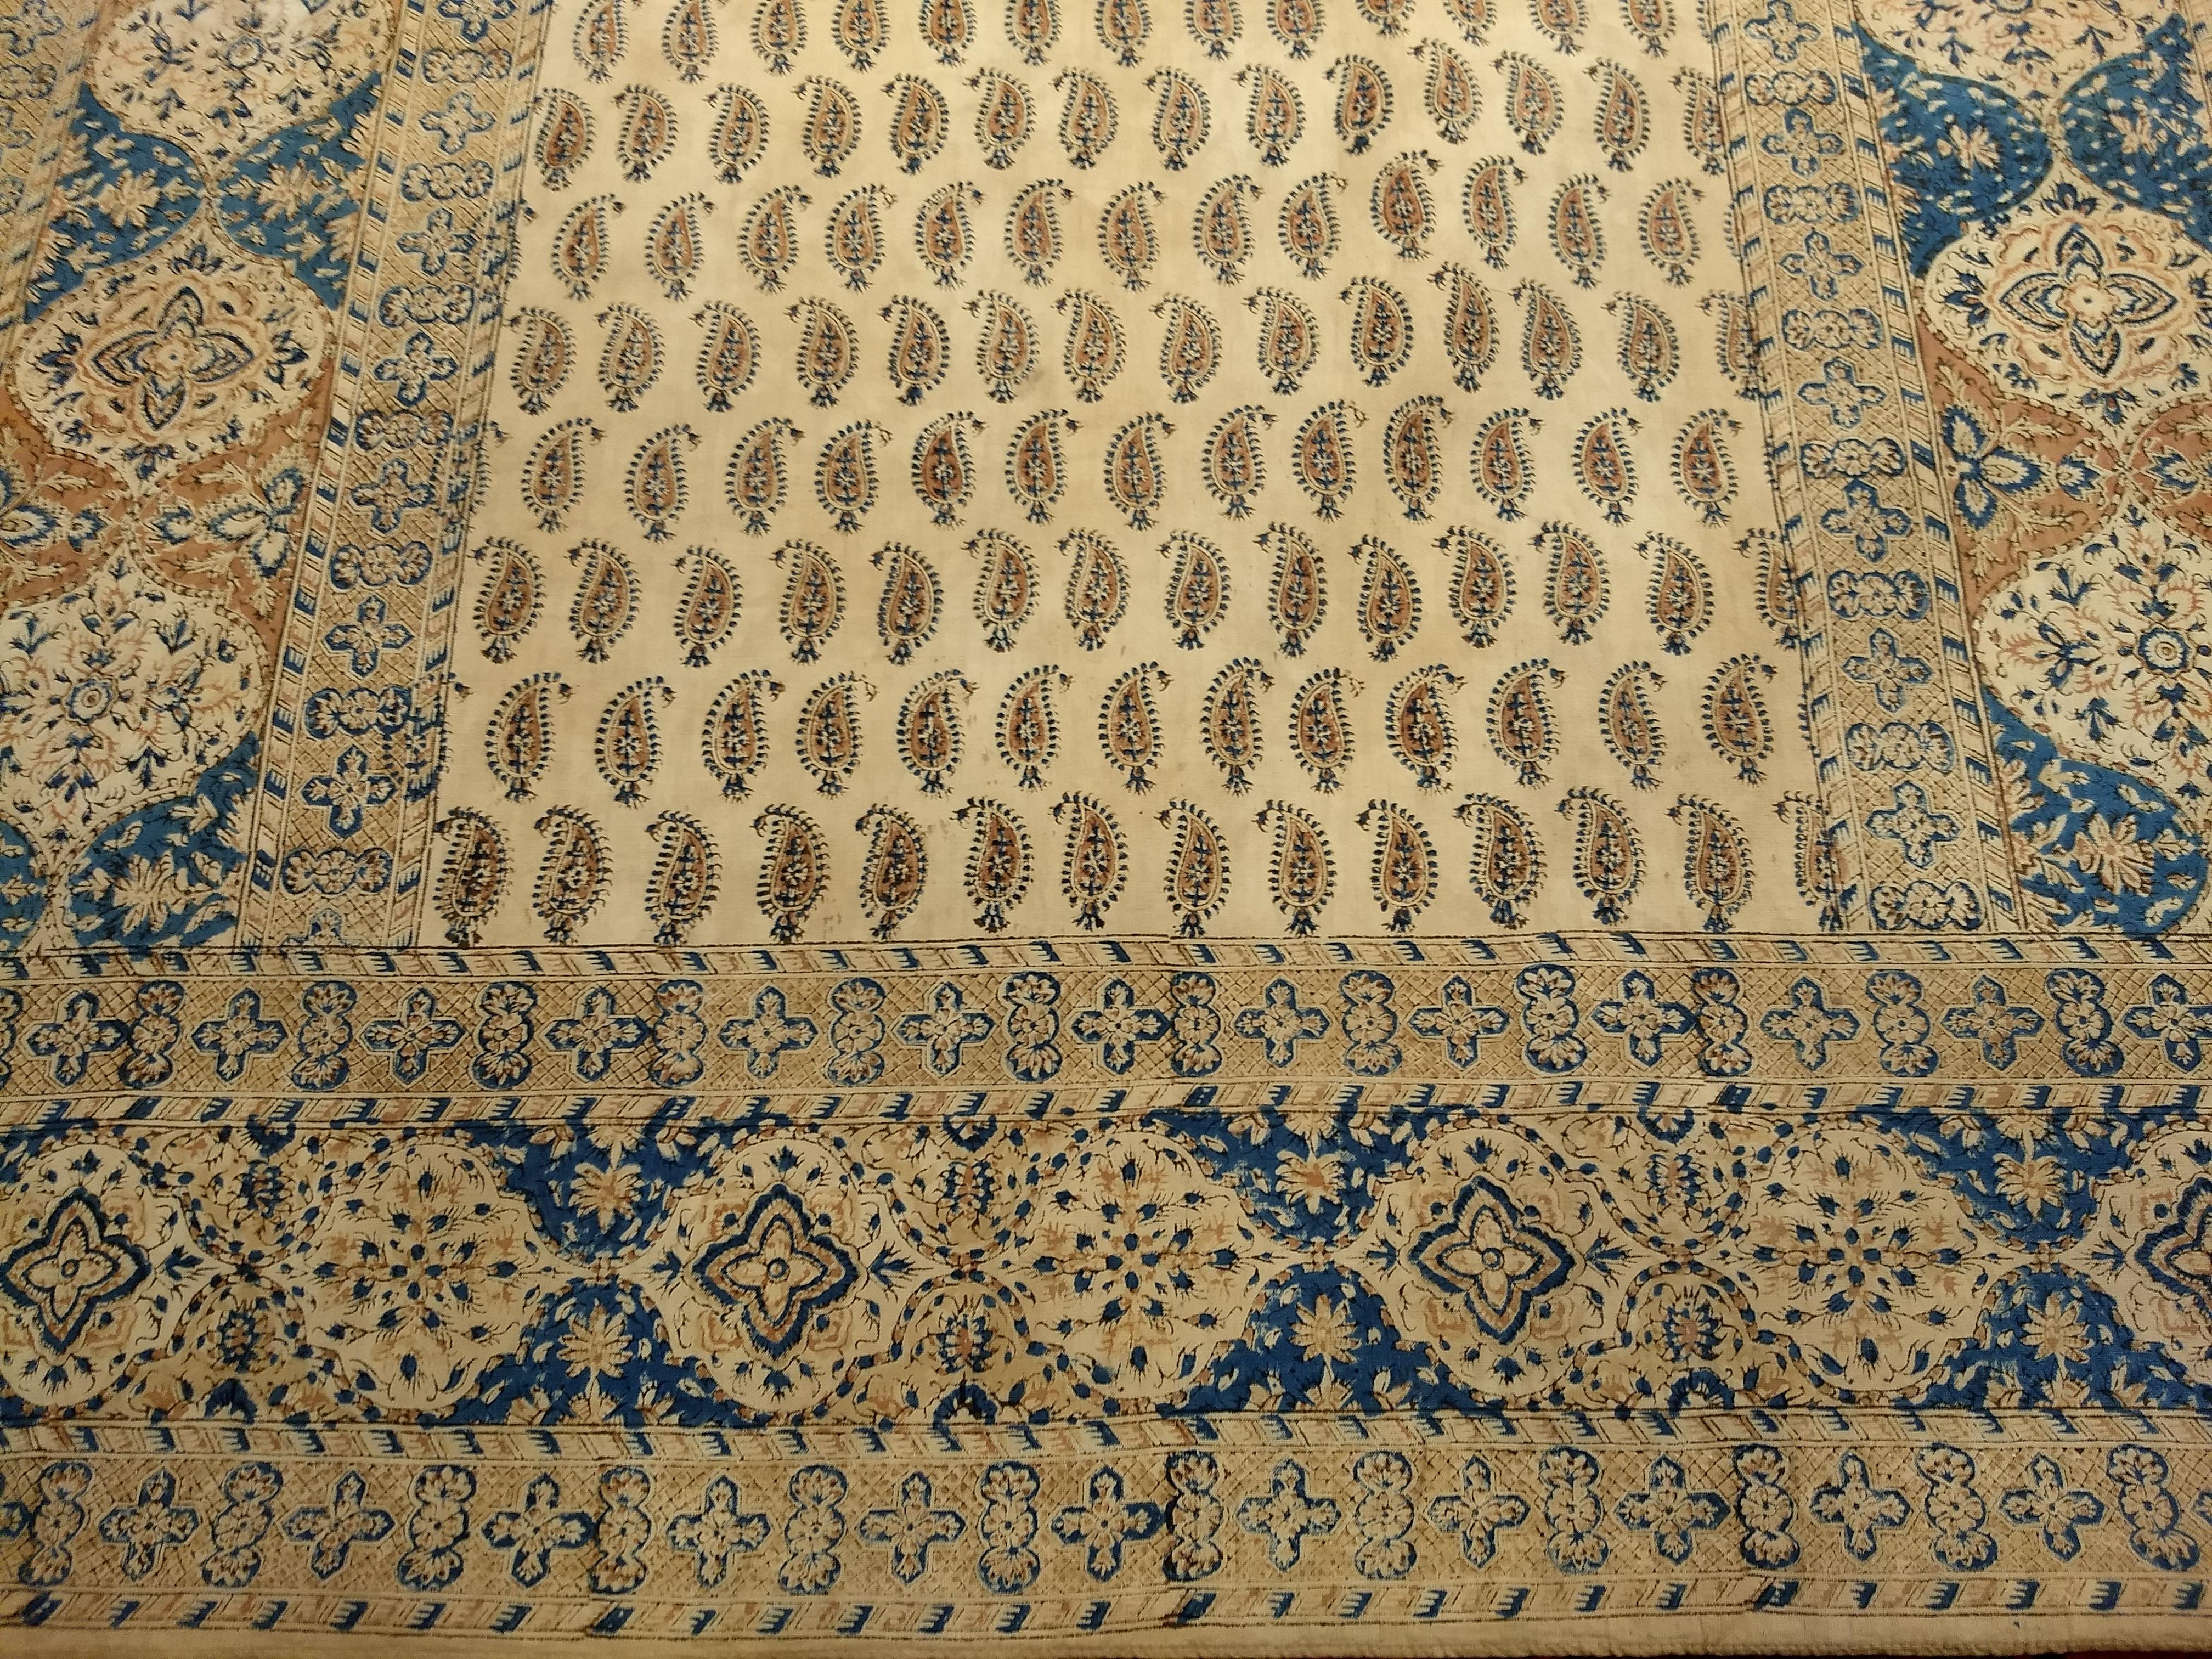 Vintage Persian Hand-Crafted Kalamkar Block Print Textile with a Paisley Pattern 3